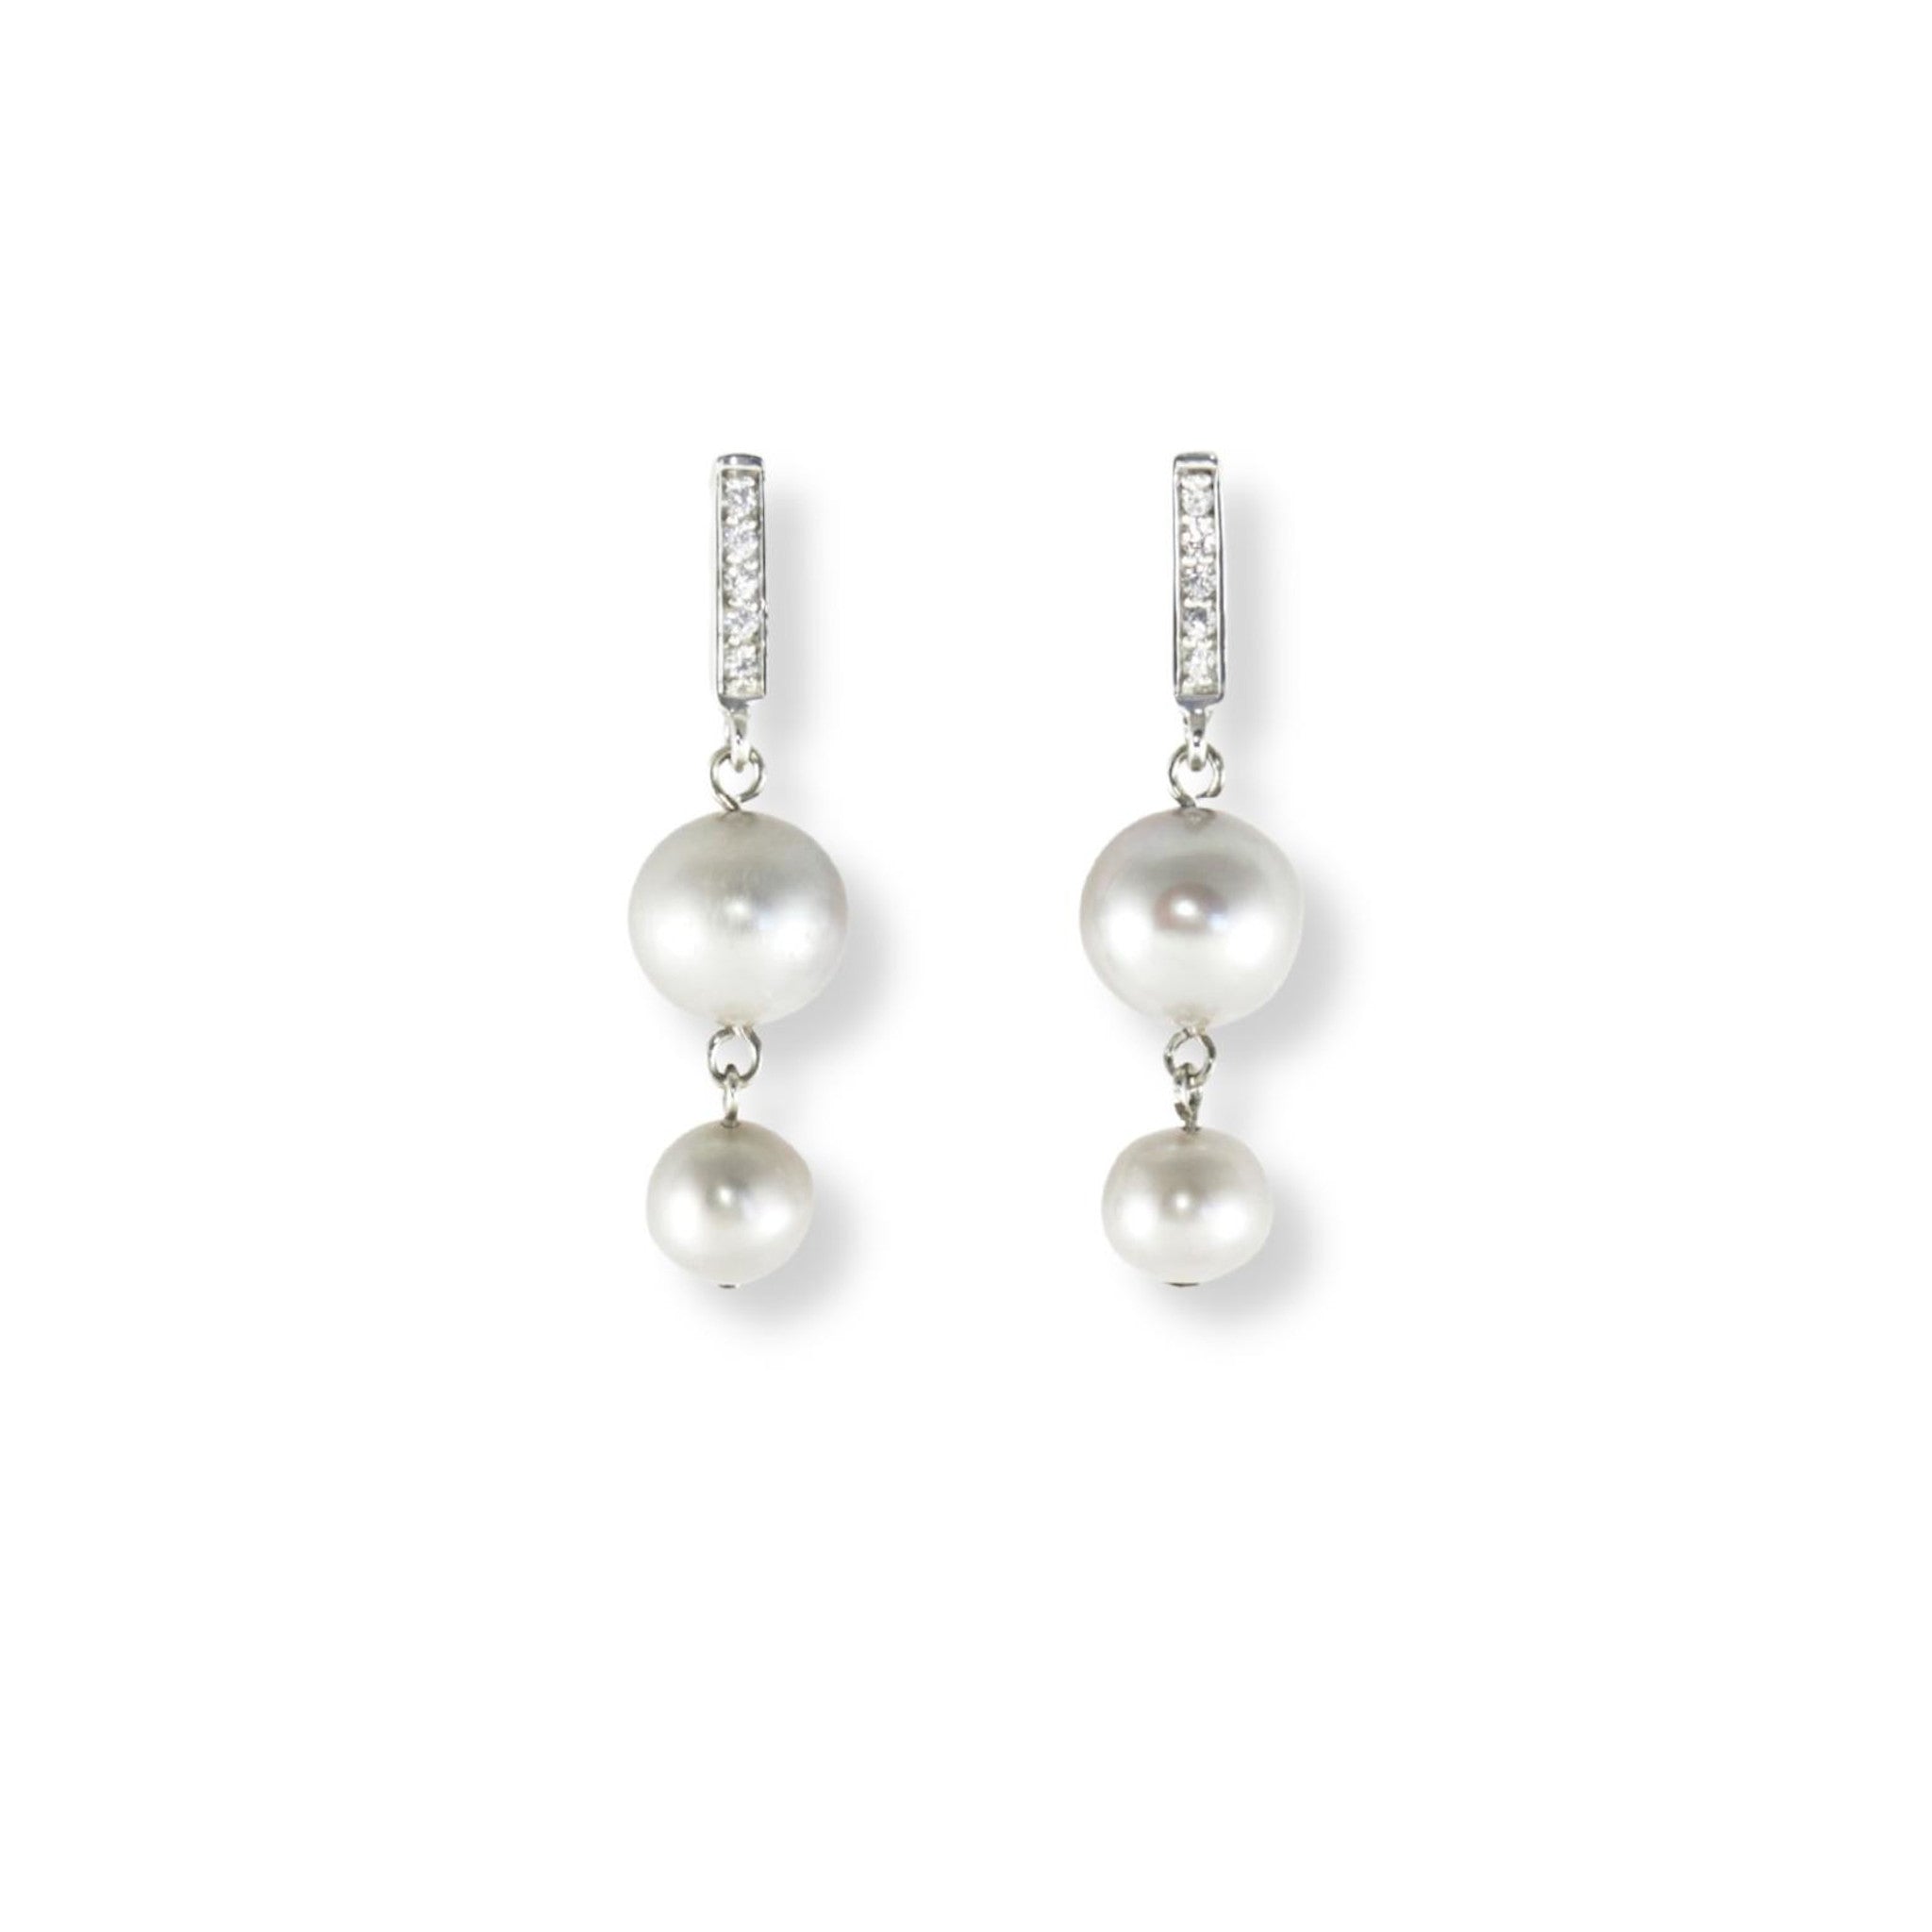 Cubic zirconia and sterling silver dangle earrings accompanied by two classic grey freshwater pearls per earring.